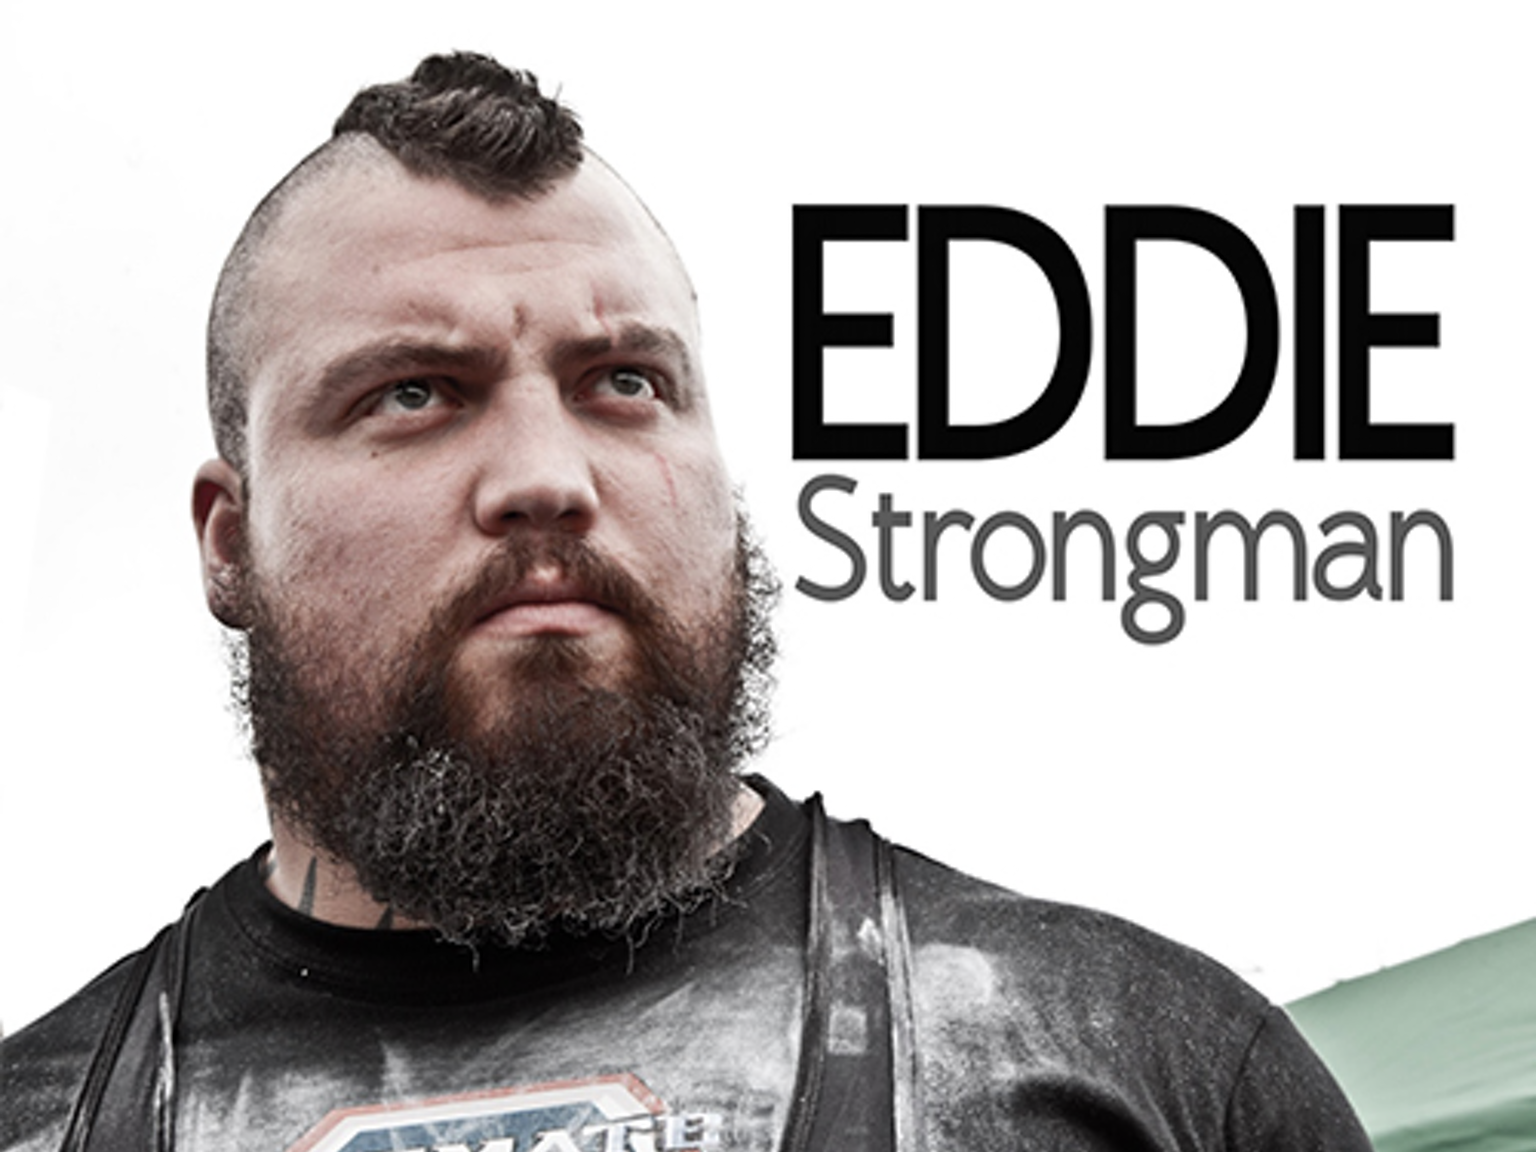 Eddie Hall thinks he can pull 1102.31 pound deadlift